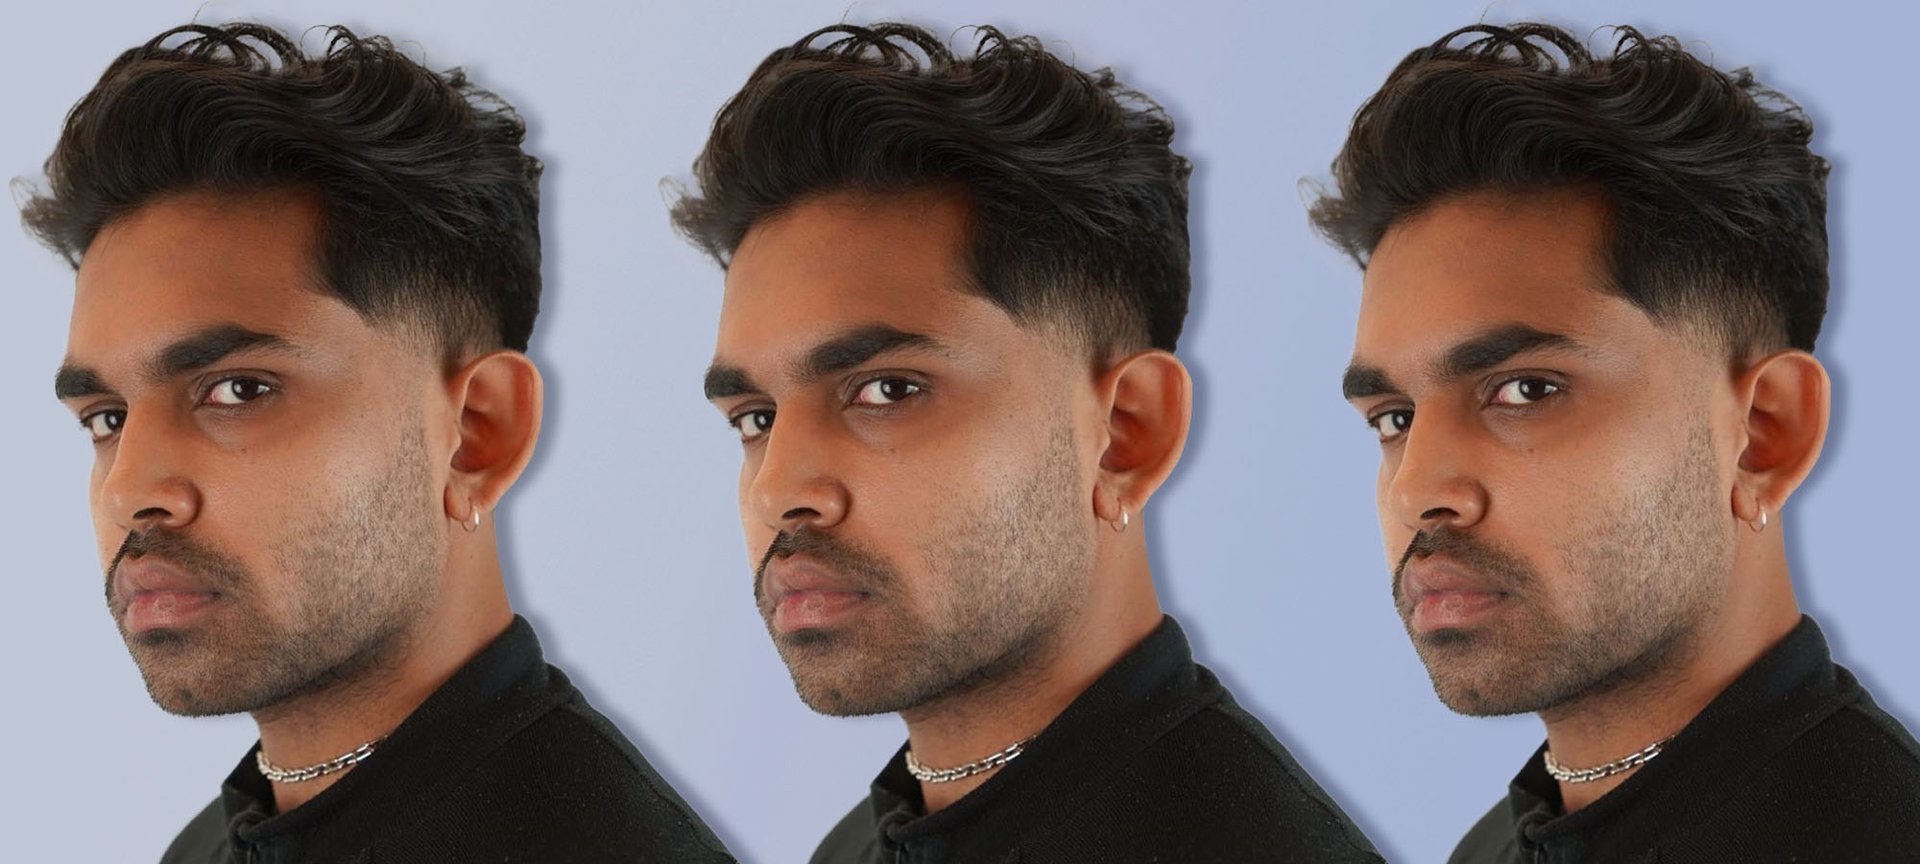 Image of Quiff hairstyle for men with straight hair